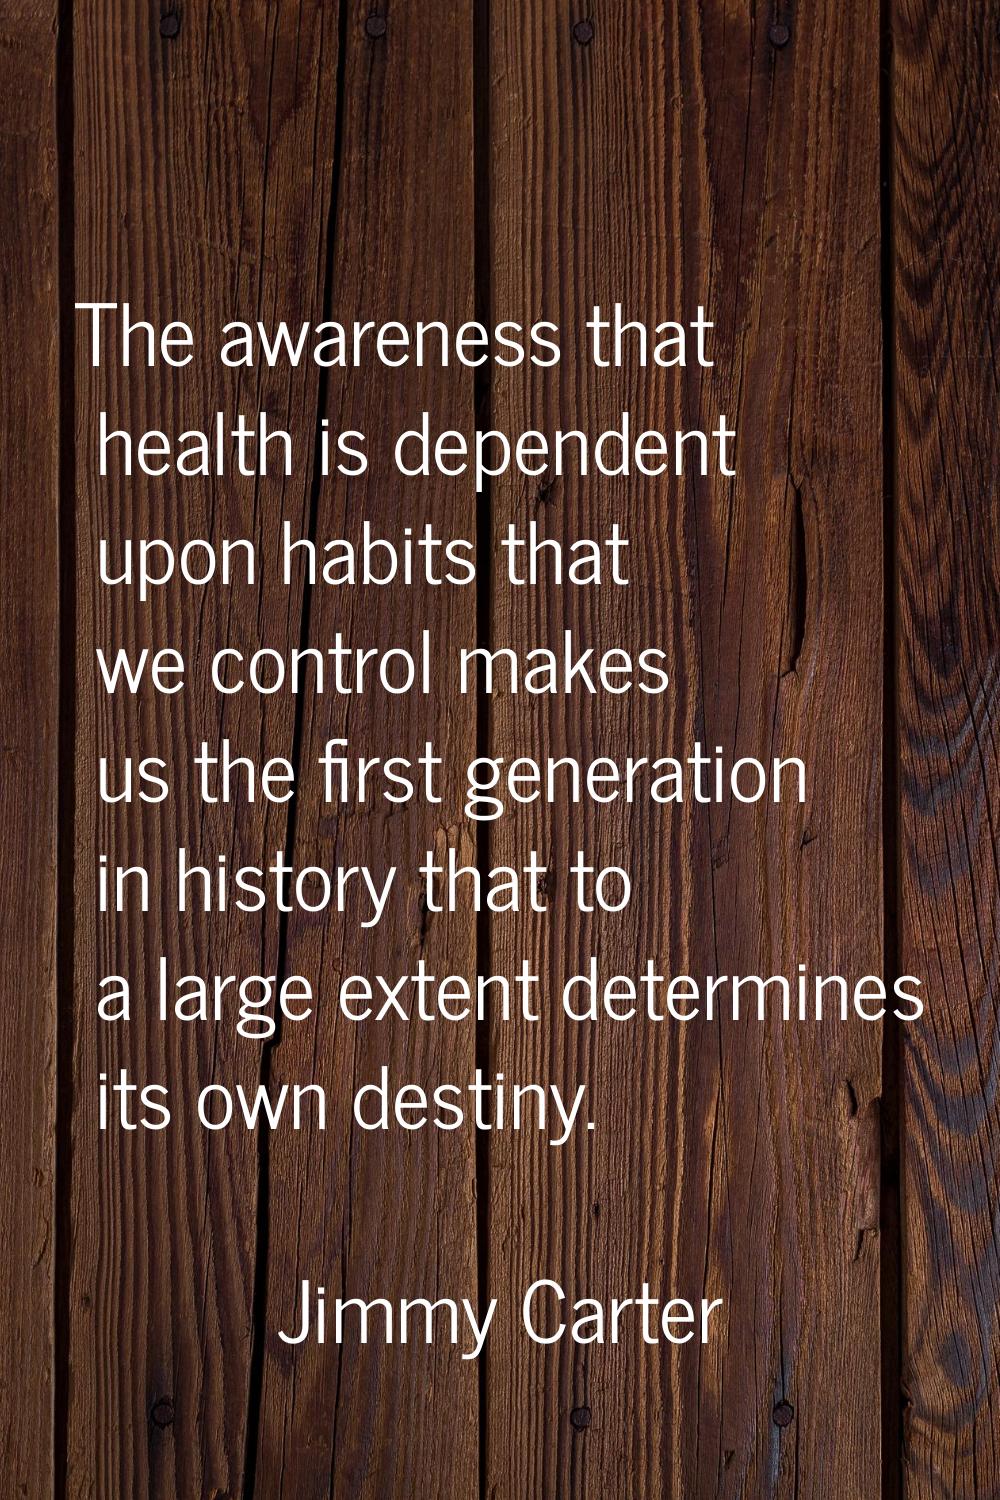 The awareness that health is dependent upon habits that we control makes us the first generation in